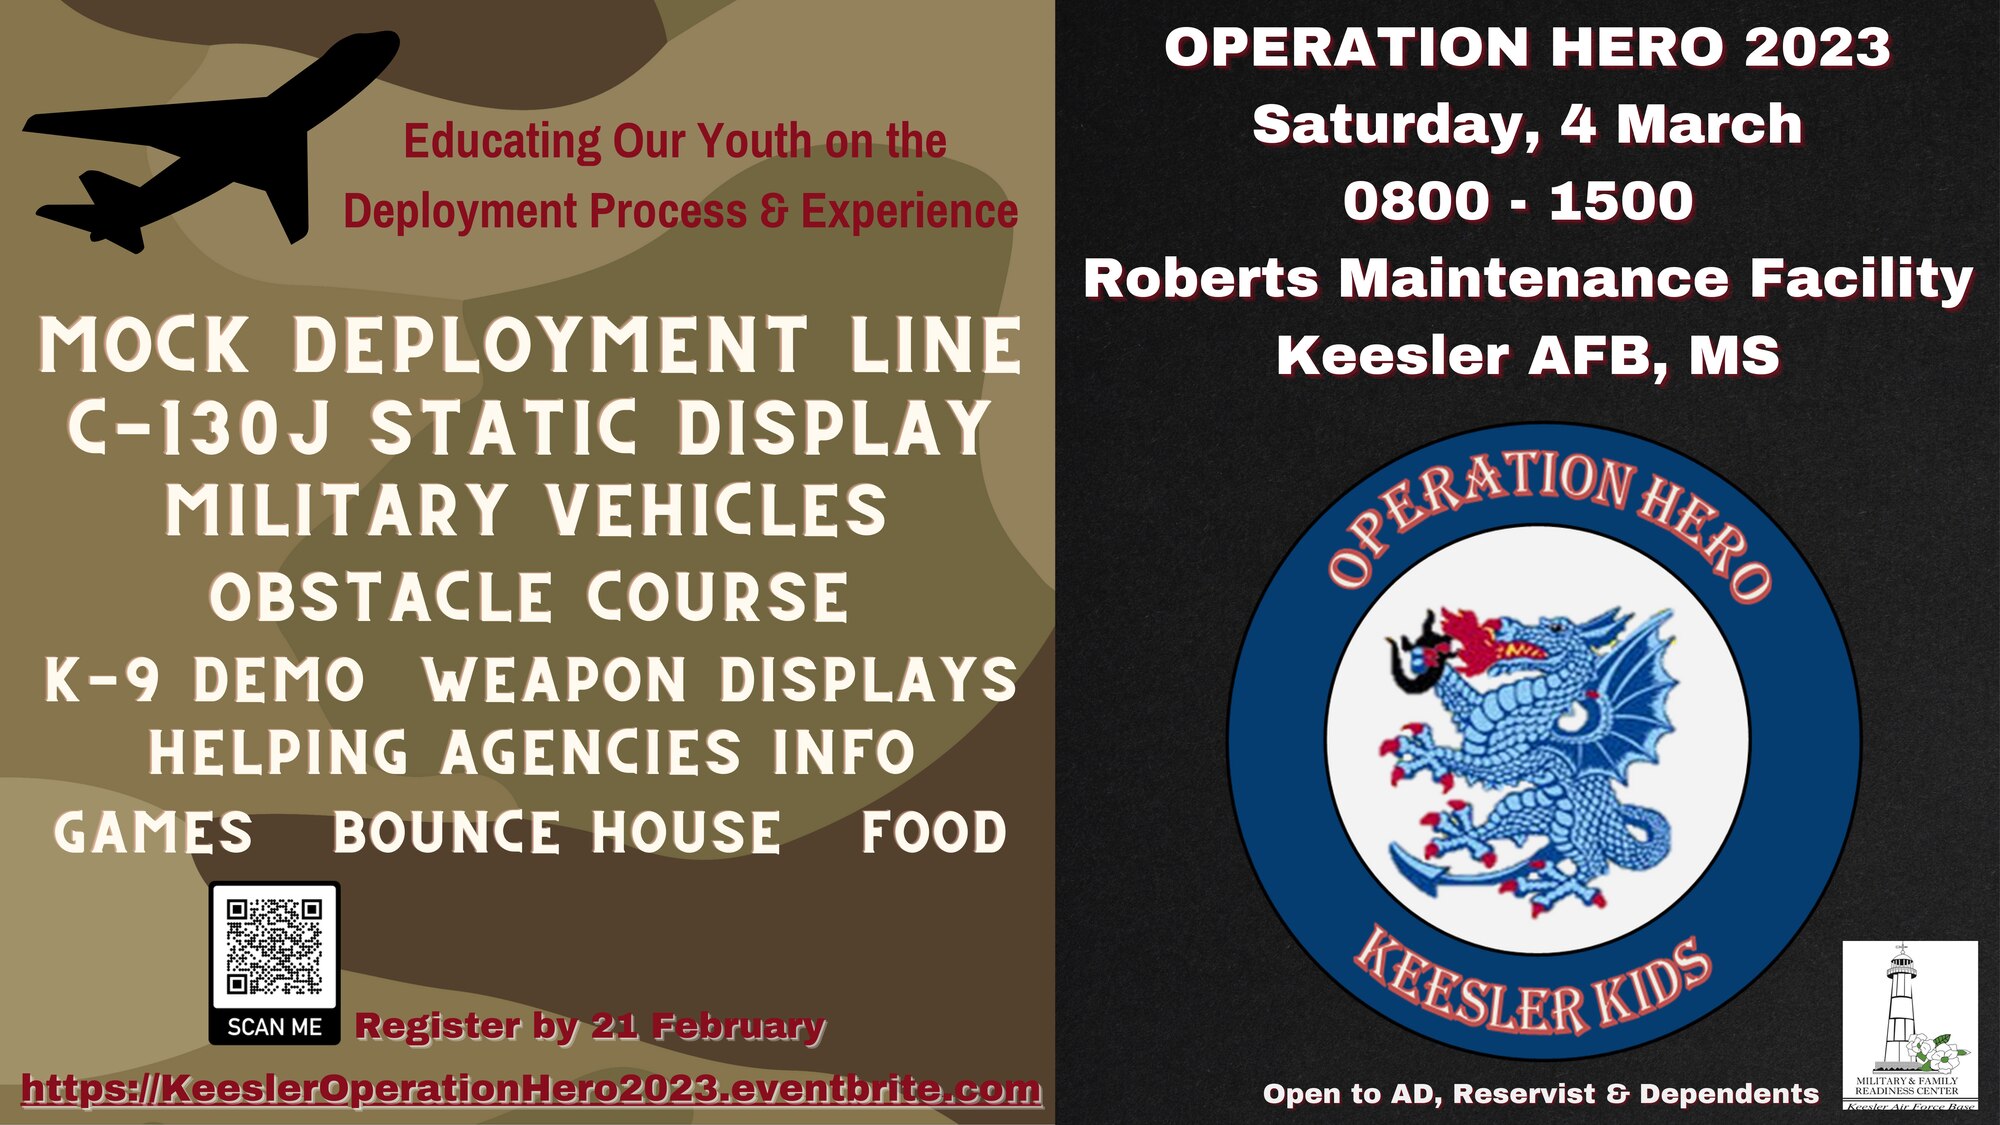 Educating our youth on the deployment process & experience. Mock deployment line; C-130J Static Display; Military Vehicles; Obstacle Course; K-9 Demo; Weapon Displays; Helping Agencies Info; Games; Bounce House; Food. QR Code displayed to register. Operation Hero 2023, Saturday 4 March, 0800- 1500; Roberts Maintenance Facility Keesler AFB, MS